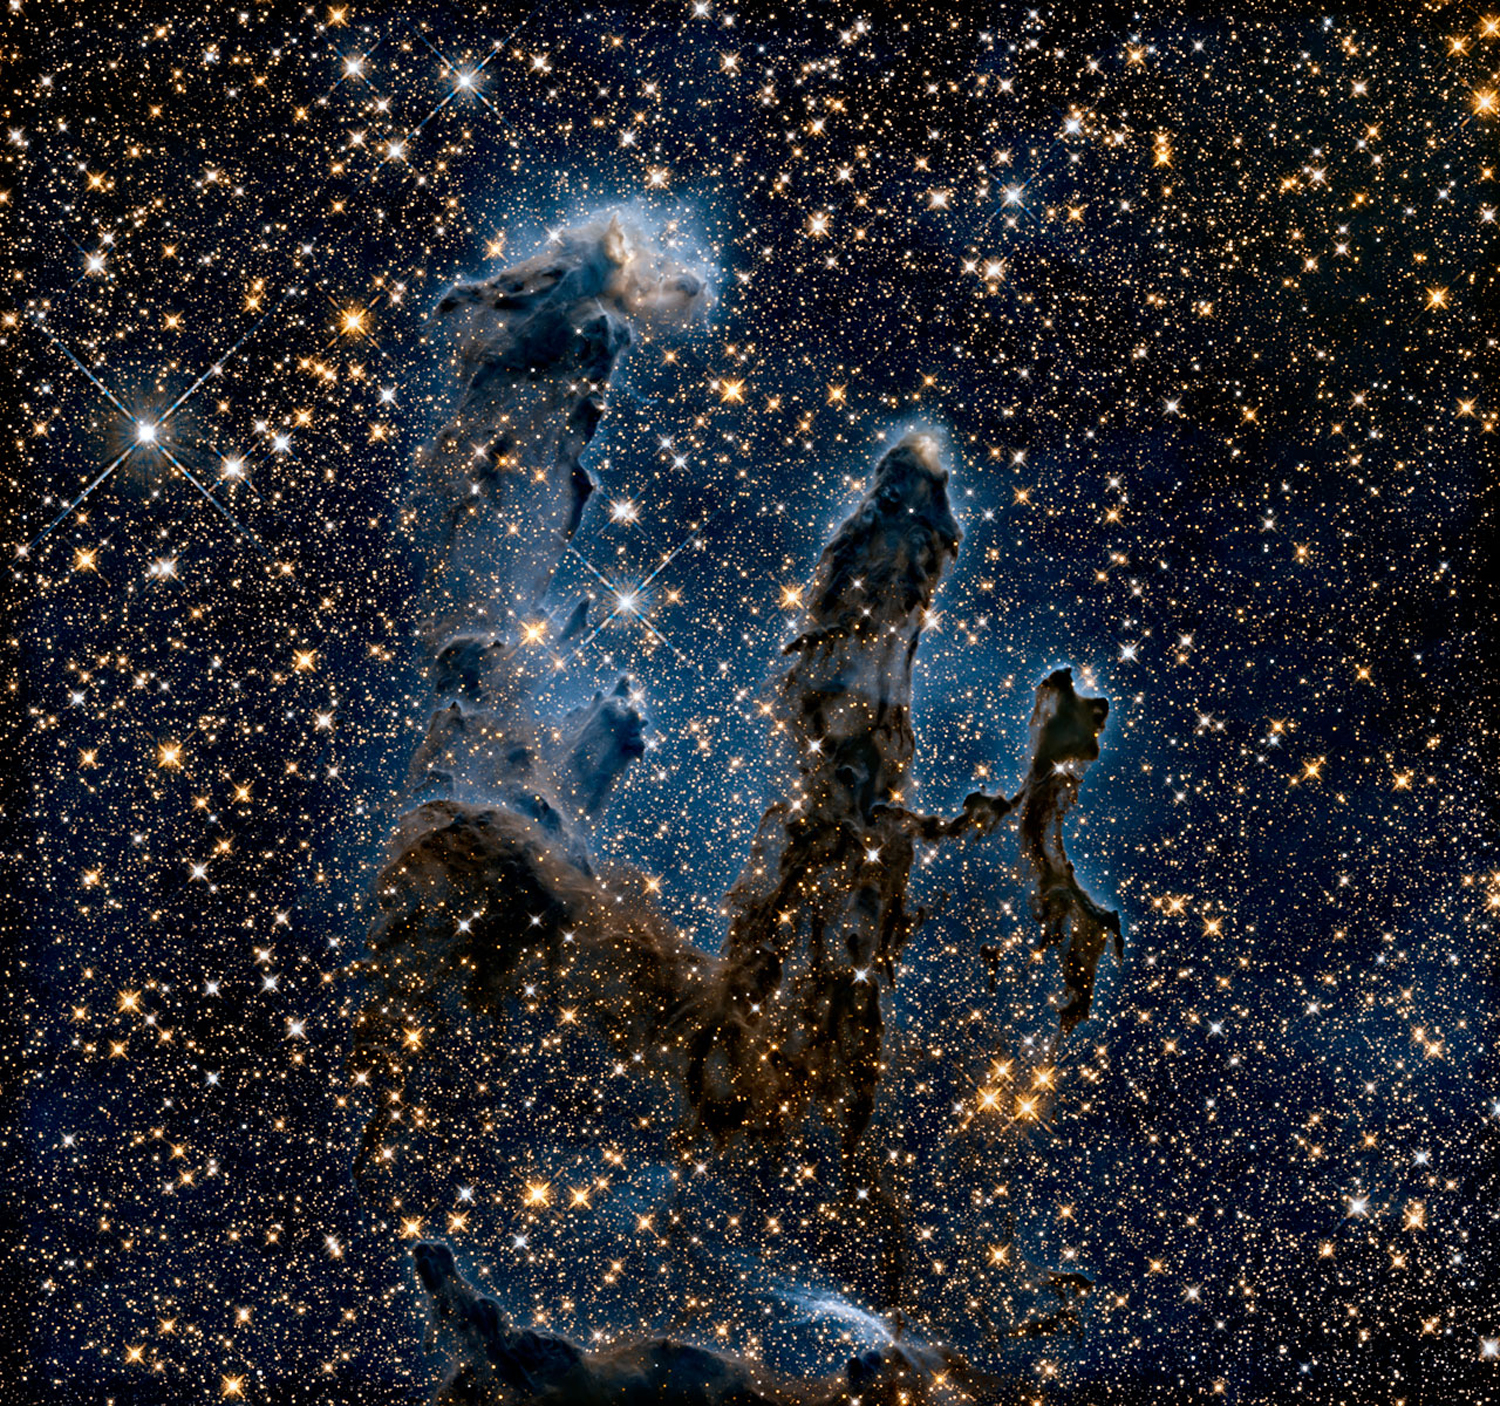 The Pillars of Creation are shown in infrared light, revealing more stars hidden by gas and dust.